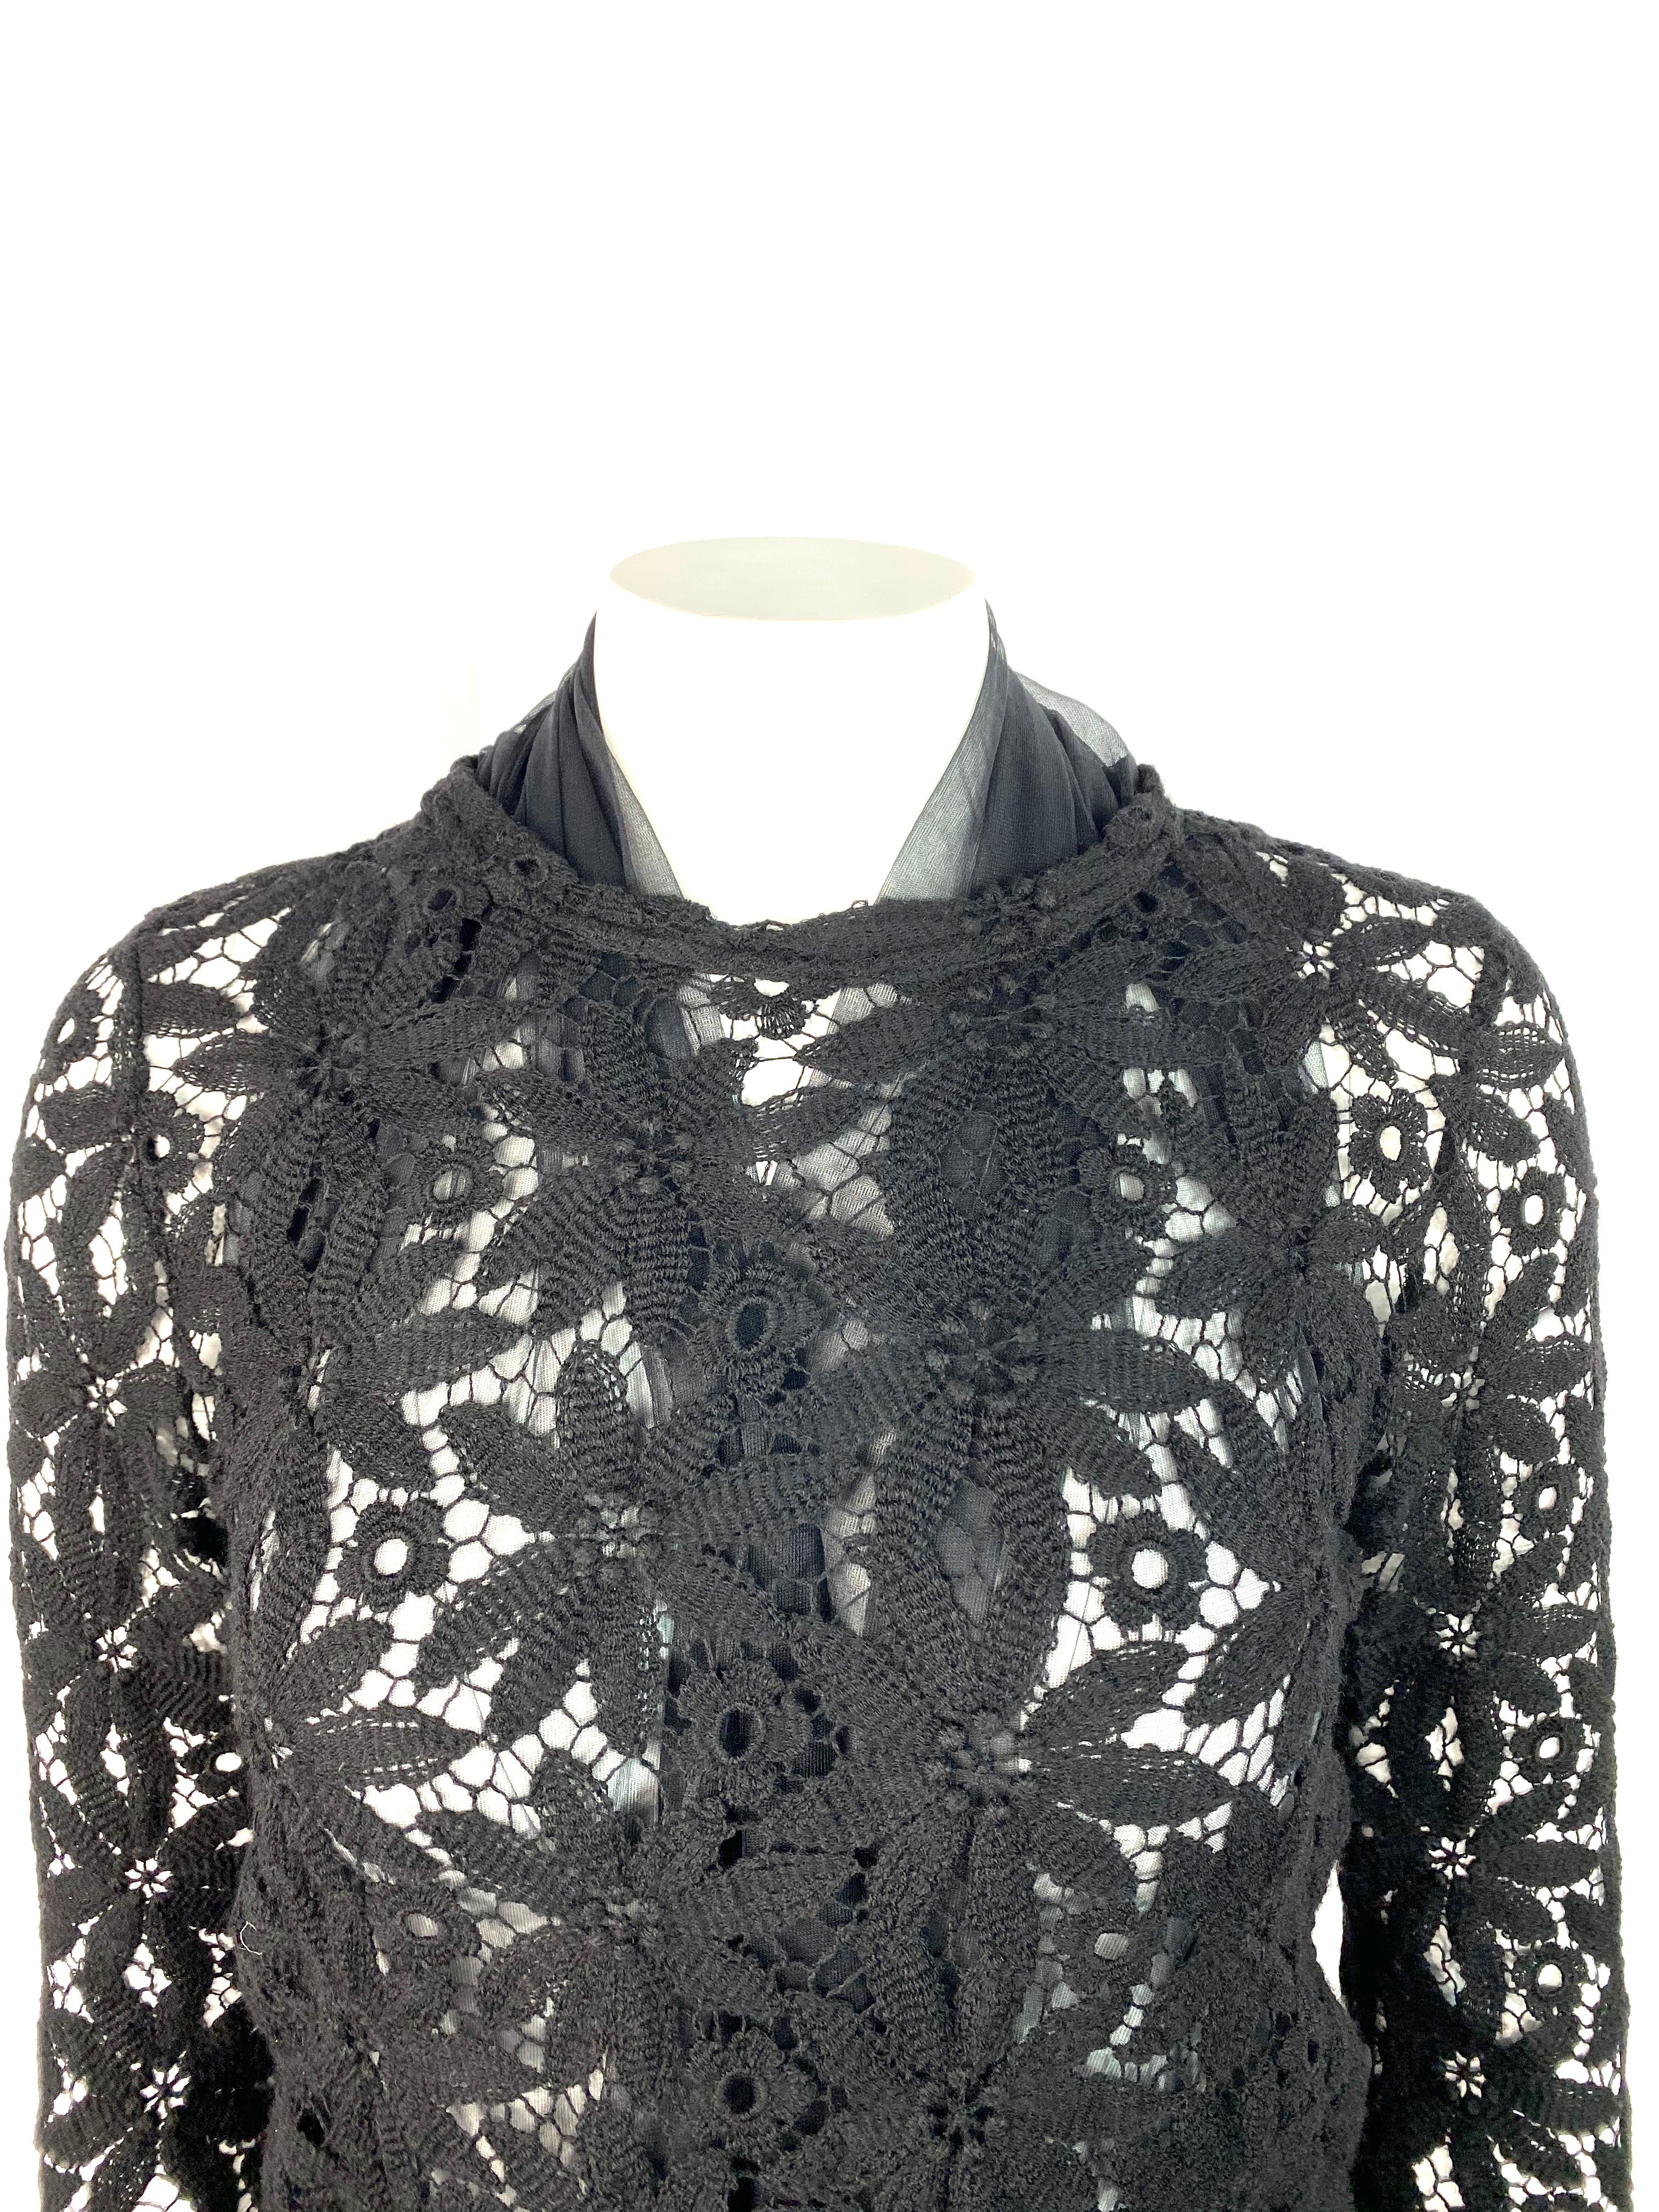 Product Details:

Featuring black floral knit, long sleeves, crew neck, tulle/ mesh design detail.
Made in Japan.